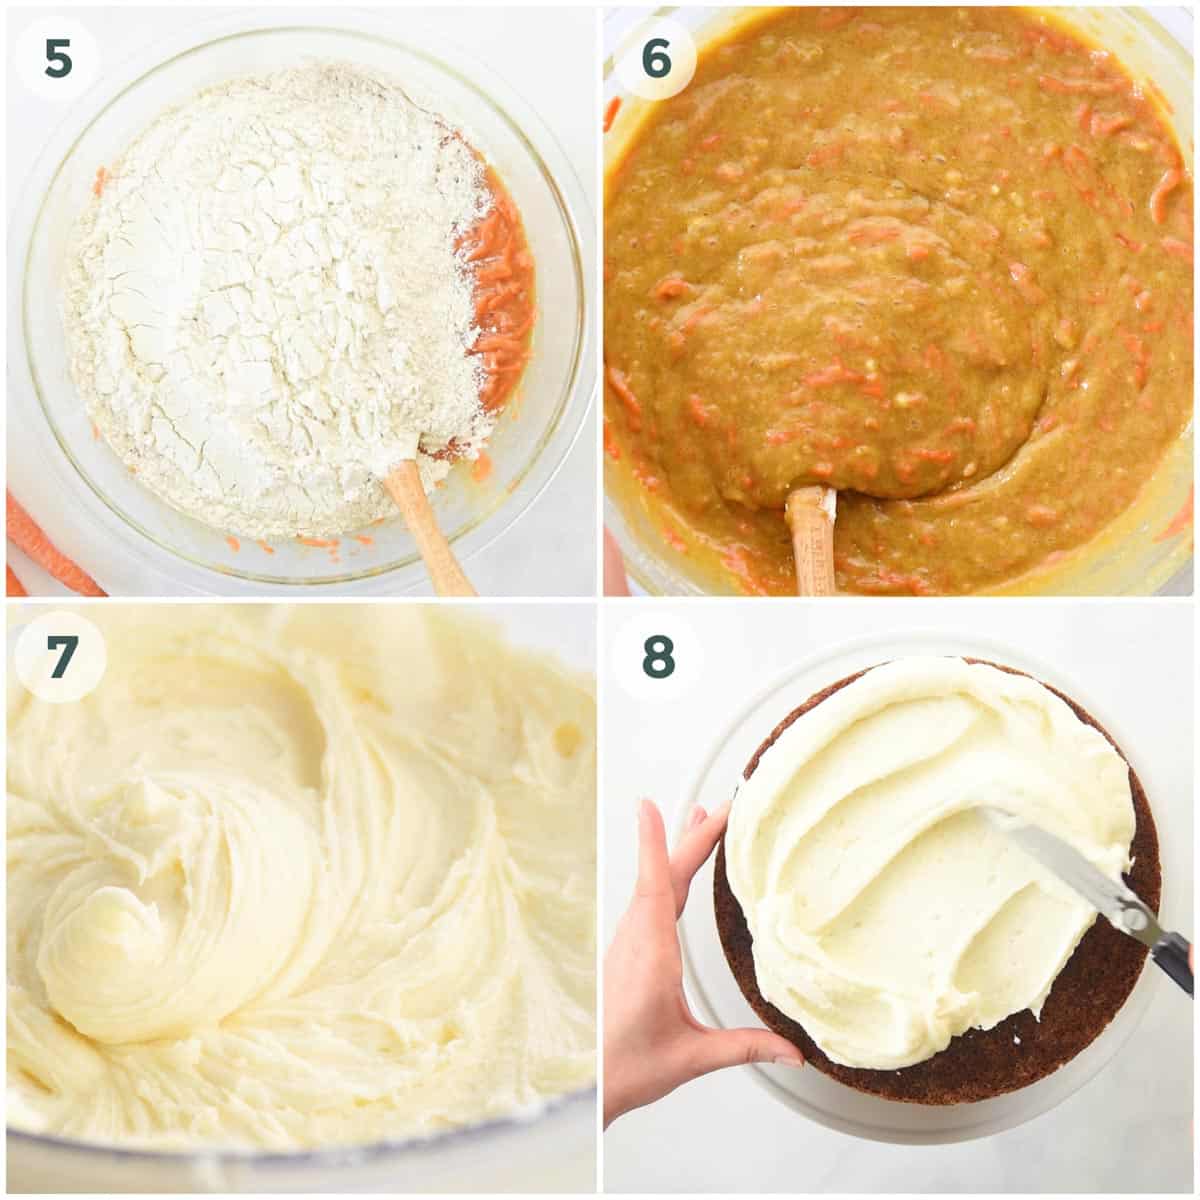 collage showing step by step preparation of carrot cake.